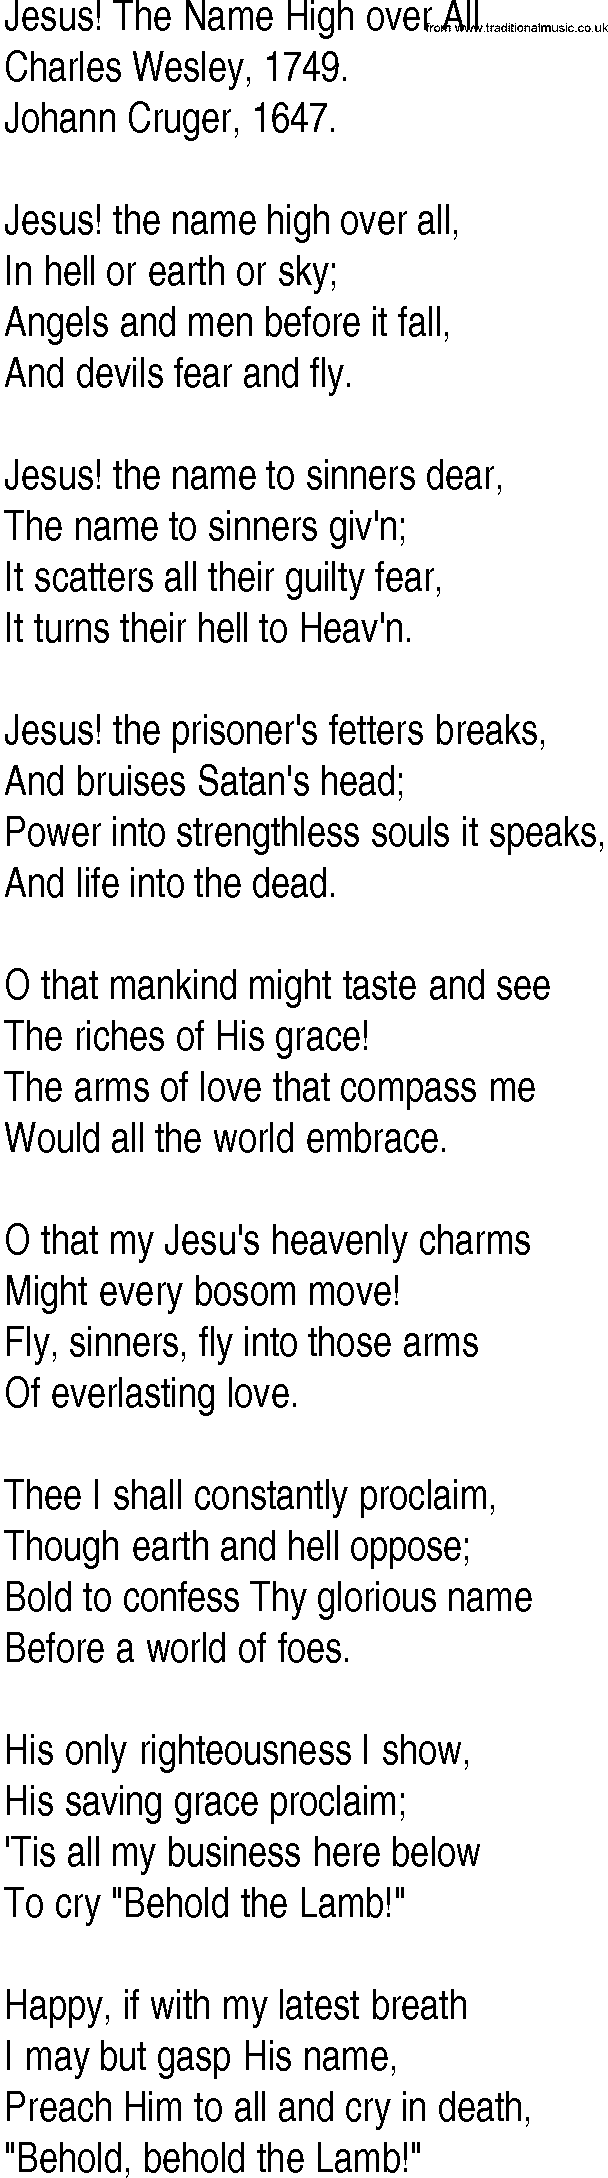 Hymn and Gospel Song: Jesus! The Name High over All by Charles Wesley lyrics